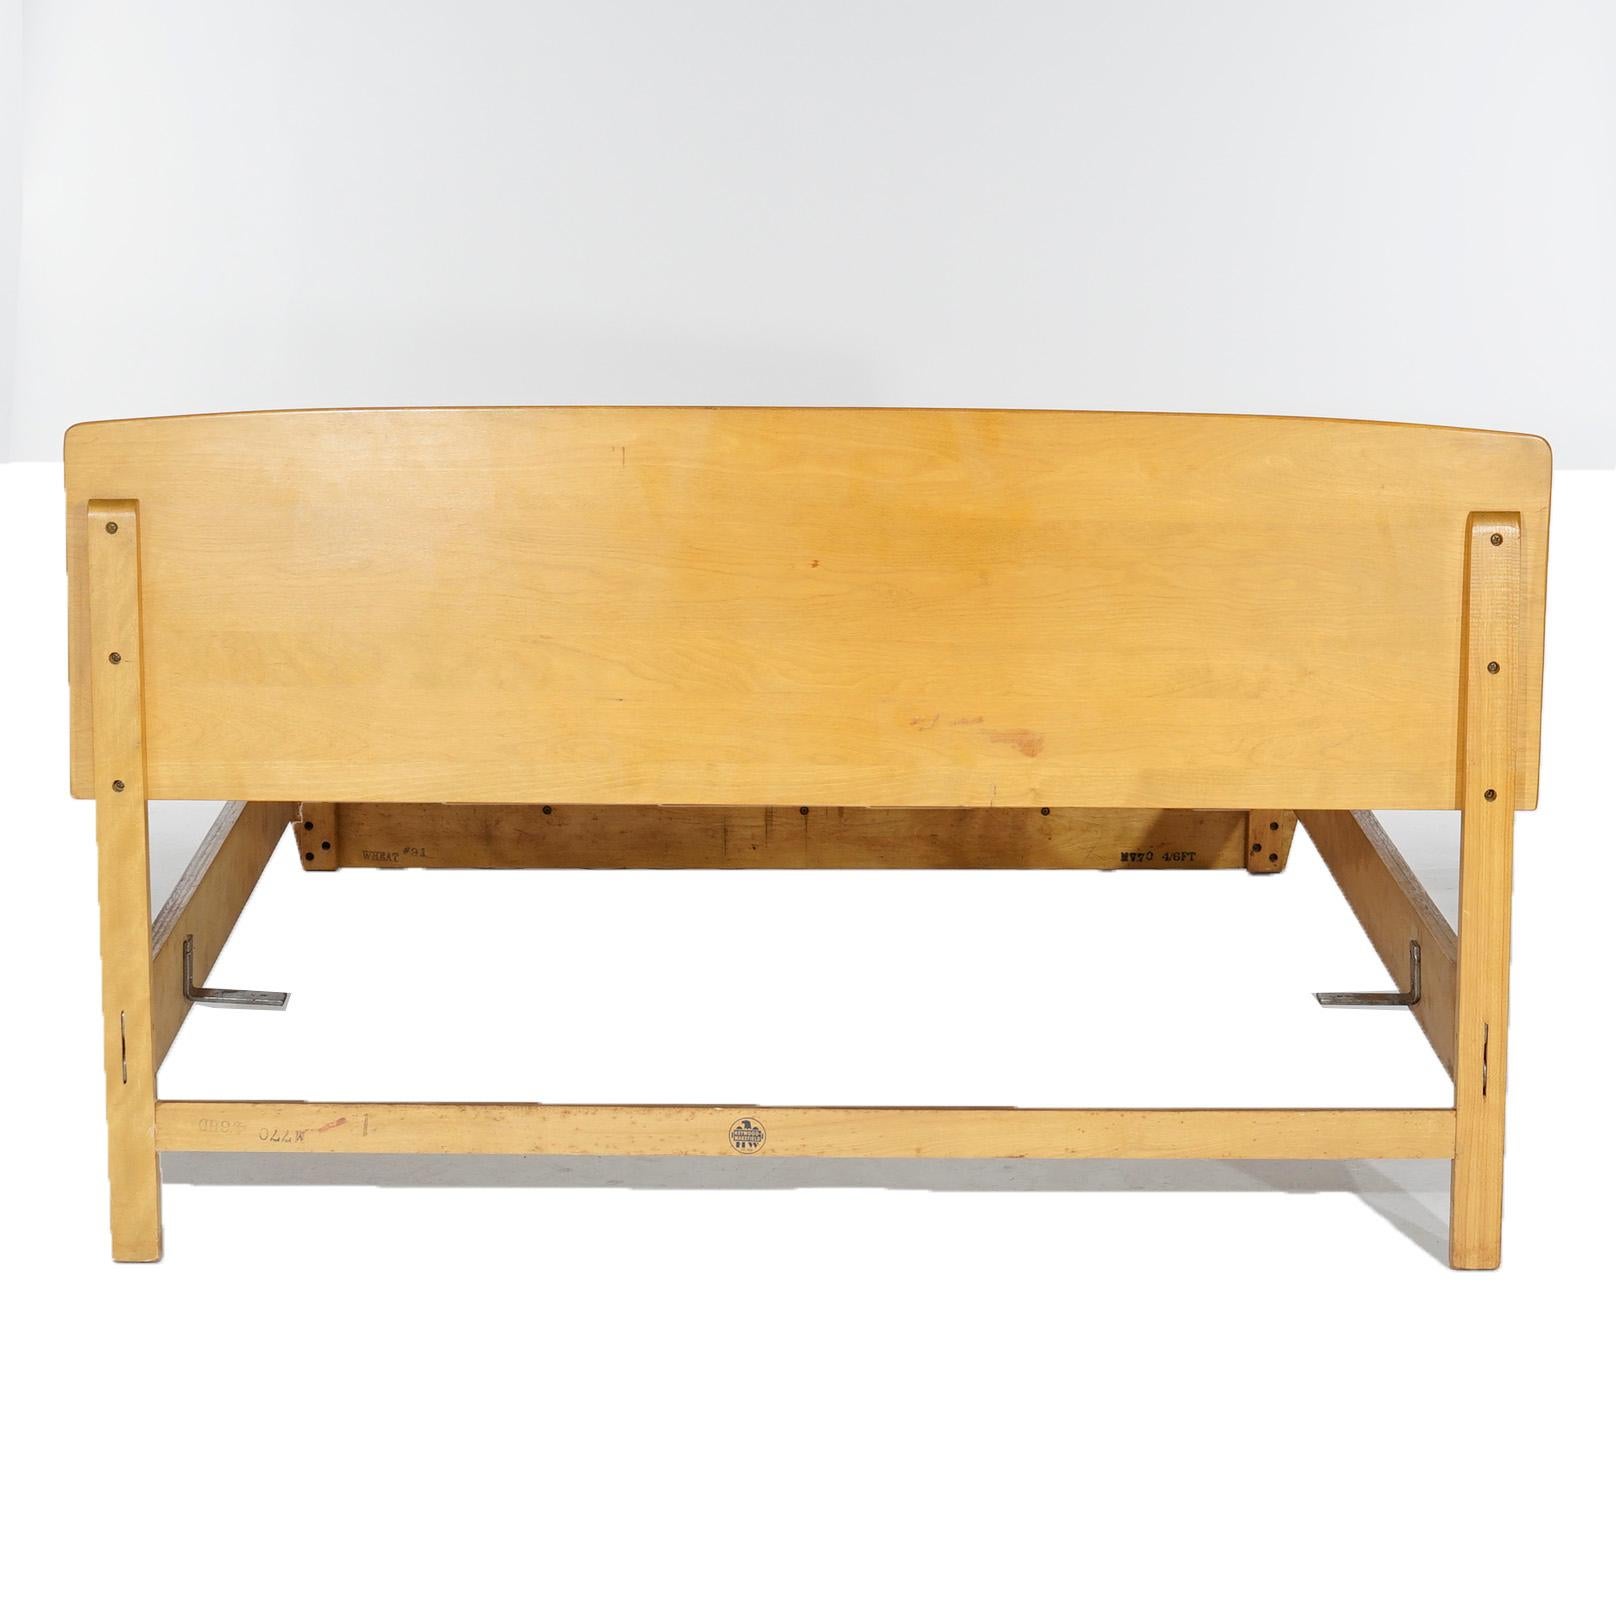 20th Century Mid-Century Modern Heywood Wakefield Double Bed, Wheat Finish, circa 1950 For Sale